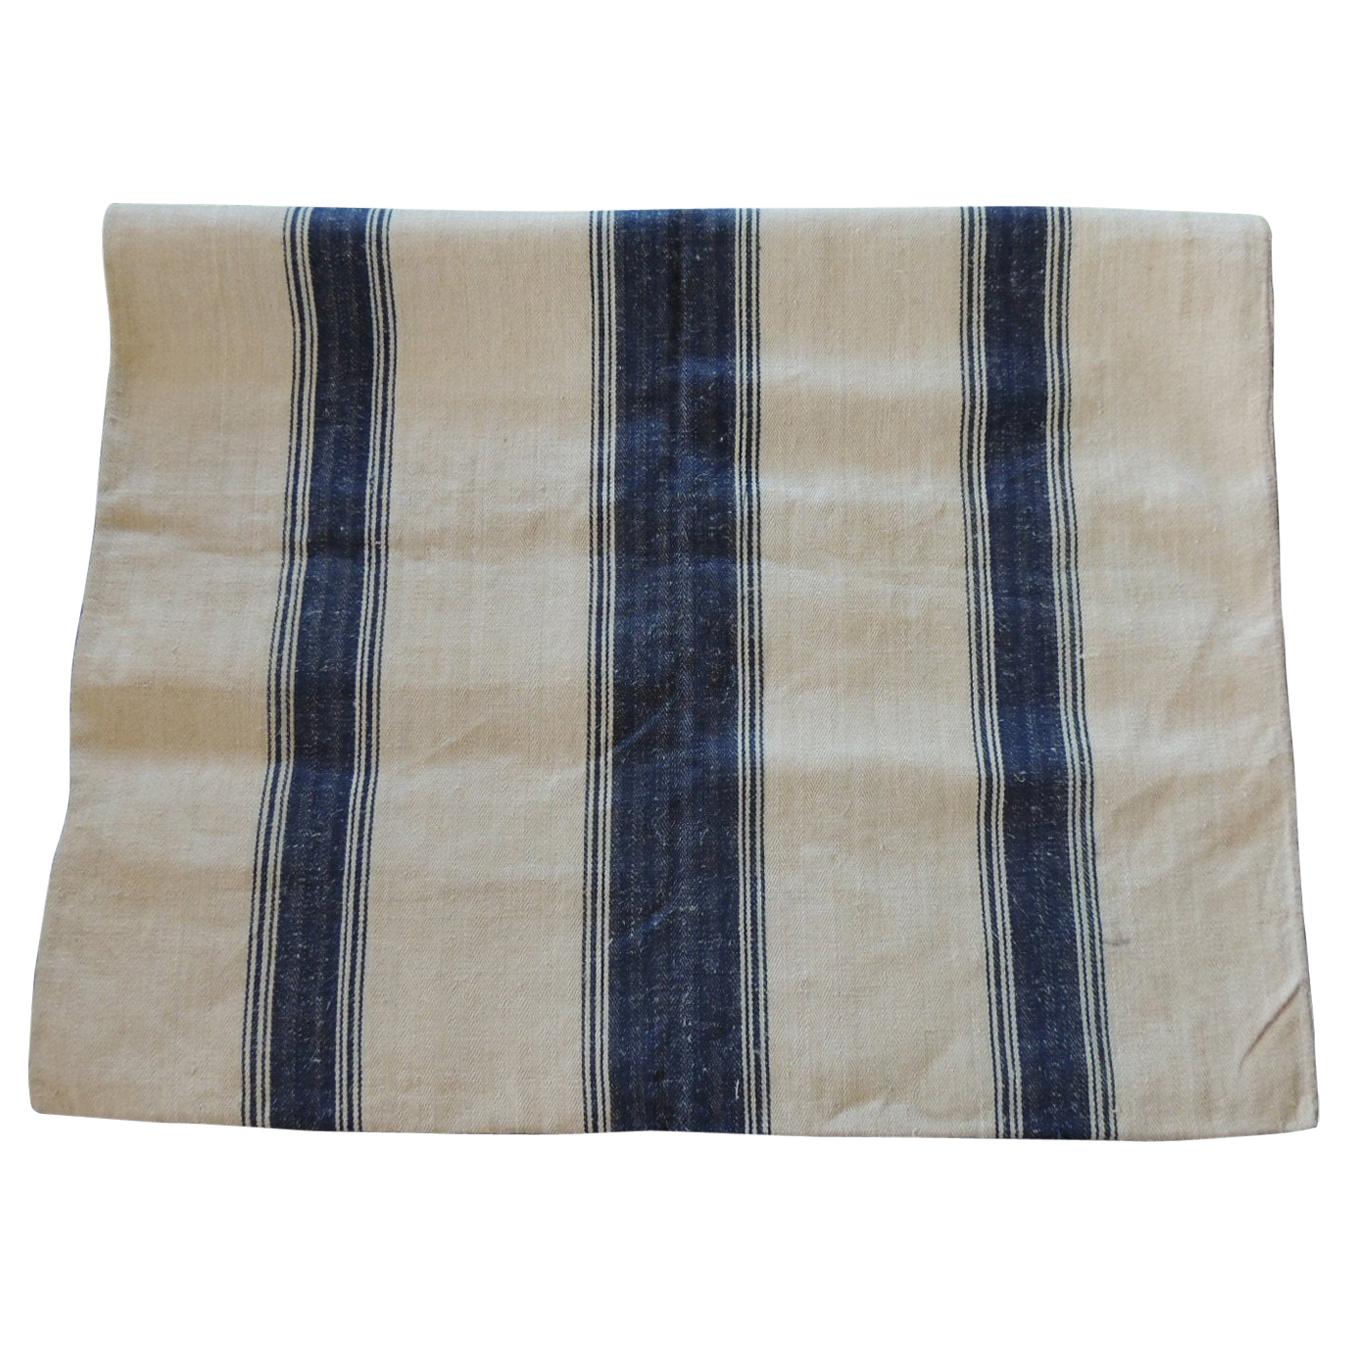 Antique French Grain Sack with Indigo and Natural Stripes